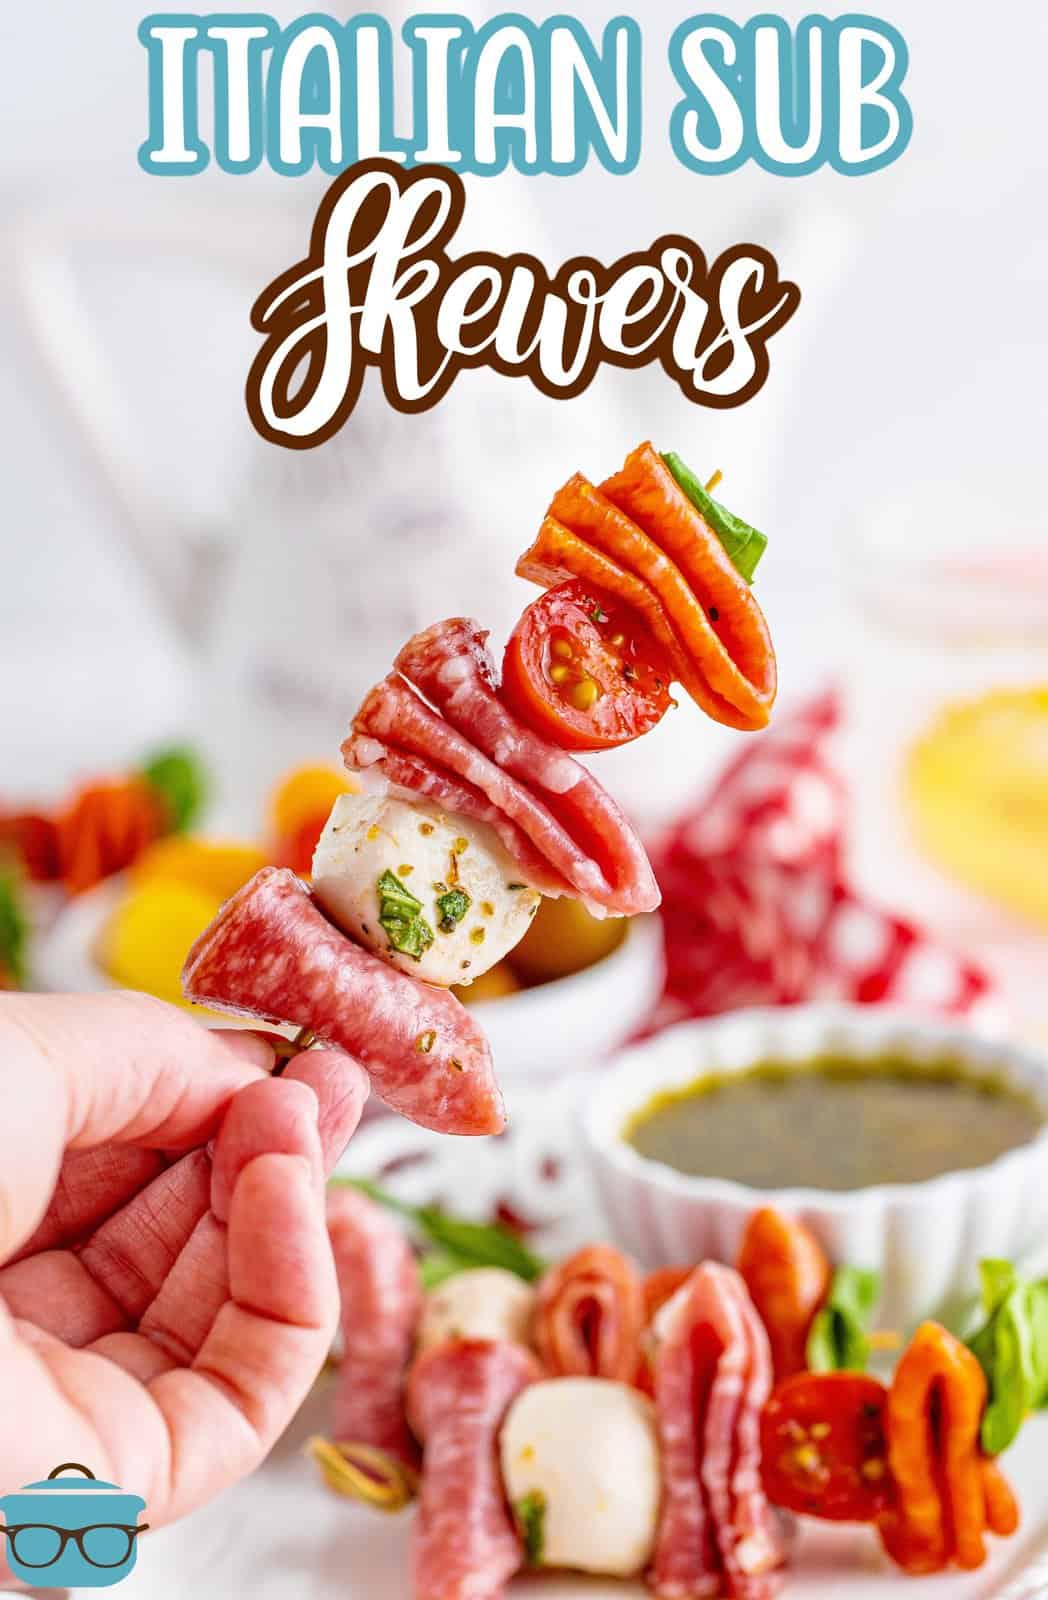 A hand holding a deconstructed Italian Sub on a skewer.